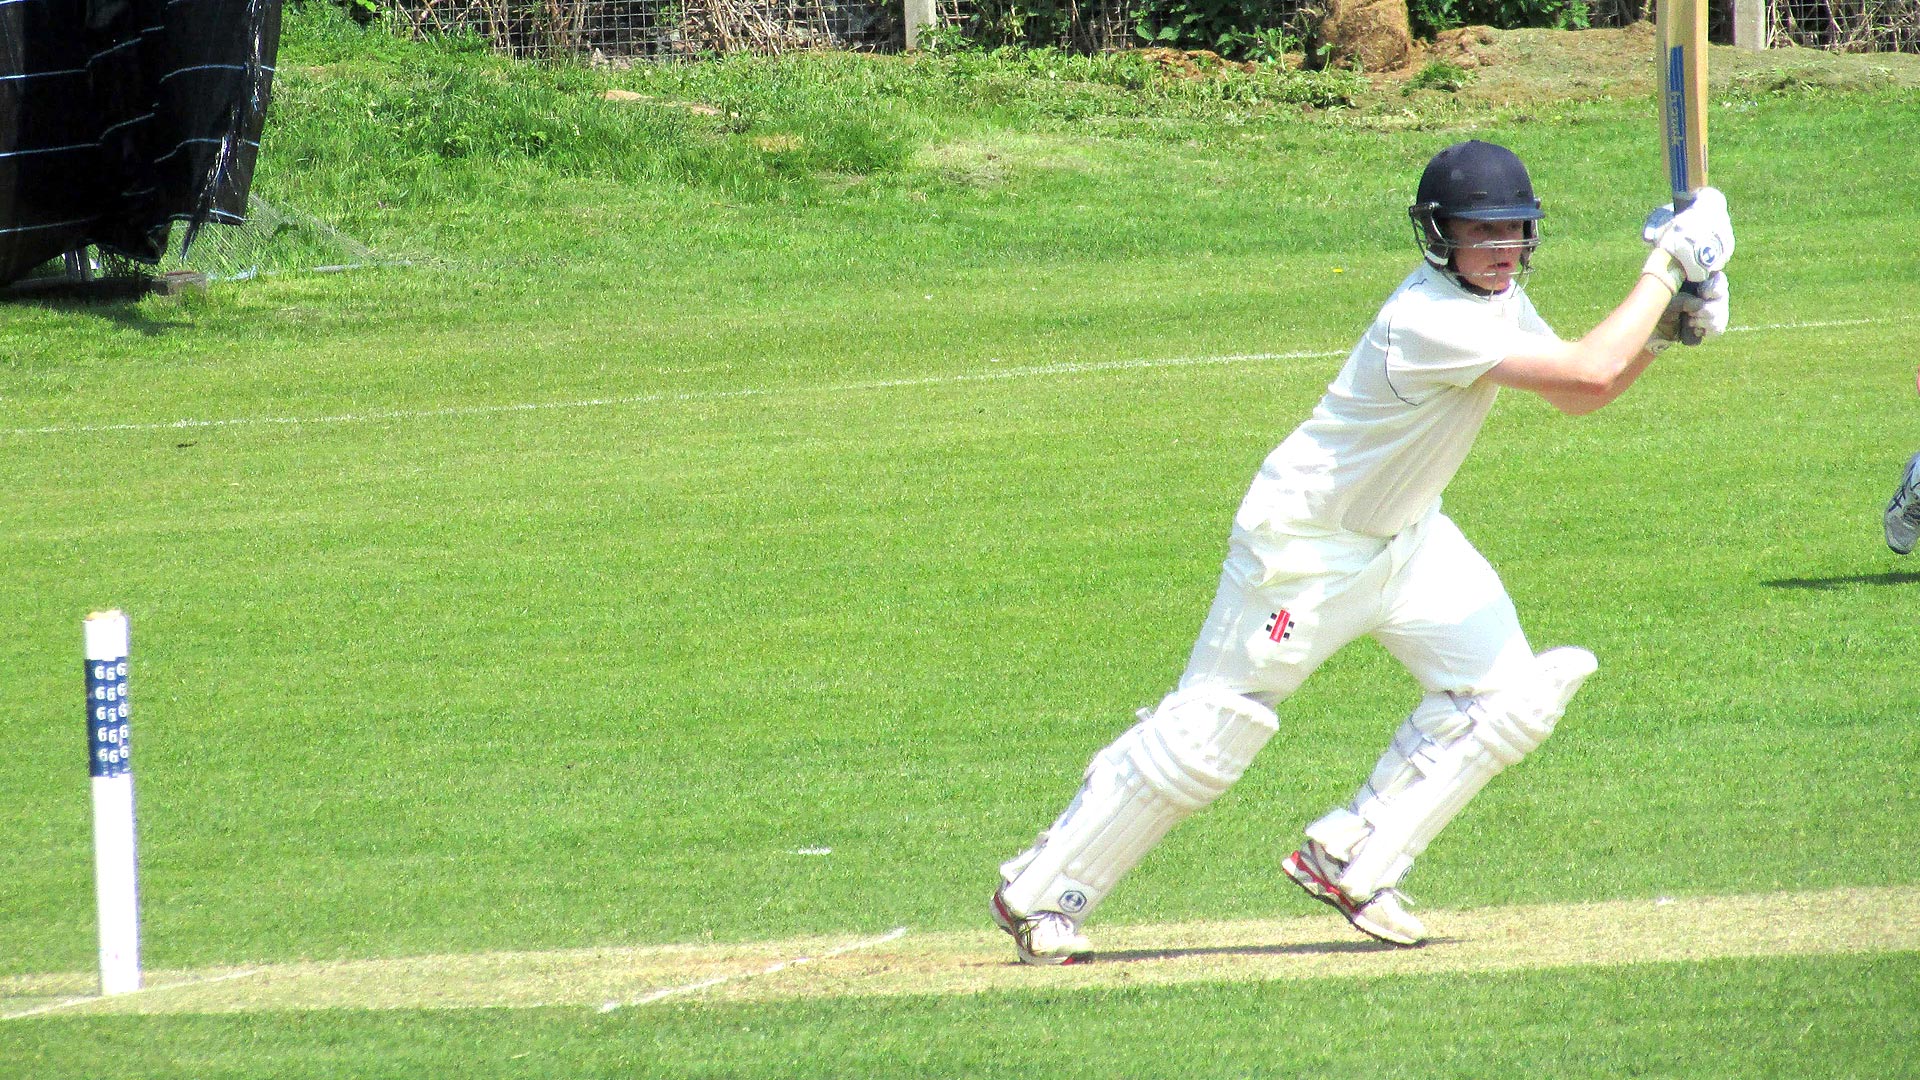 Gloucestershire Youth Cricketer Batting